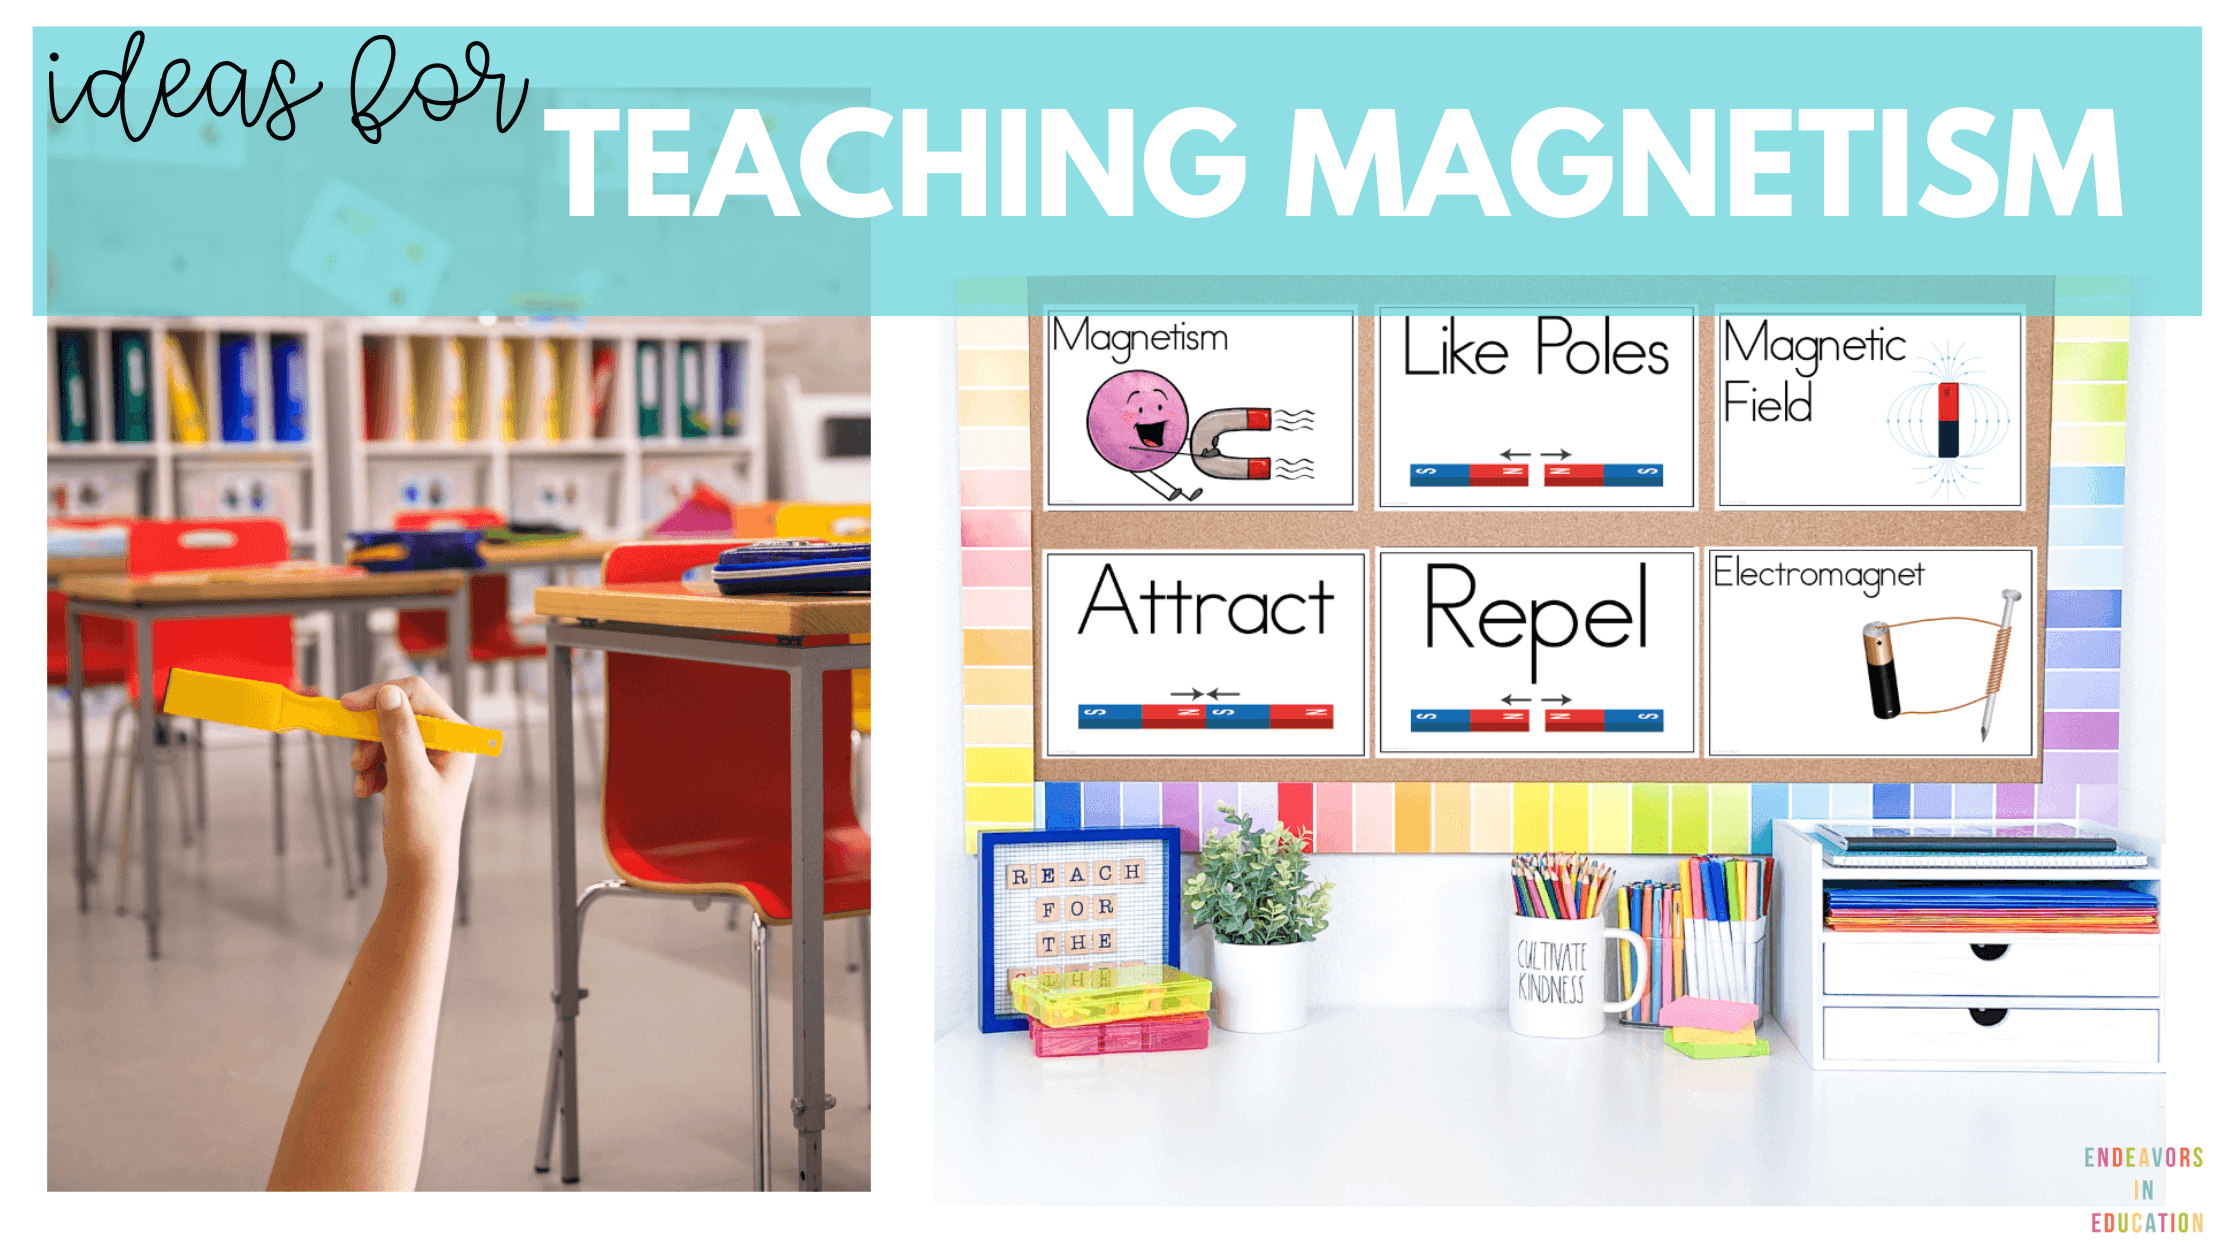 Image test says "ideas for teaching magnetism" at the top. There are two images within. The image to the left shows a child's hand holding a handheld magnet in an elementary classroom. The image on the right shows a bulletin board for vocabulary for teaching magnetism